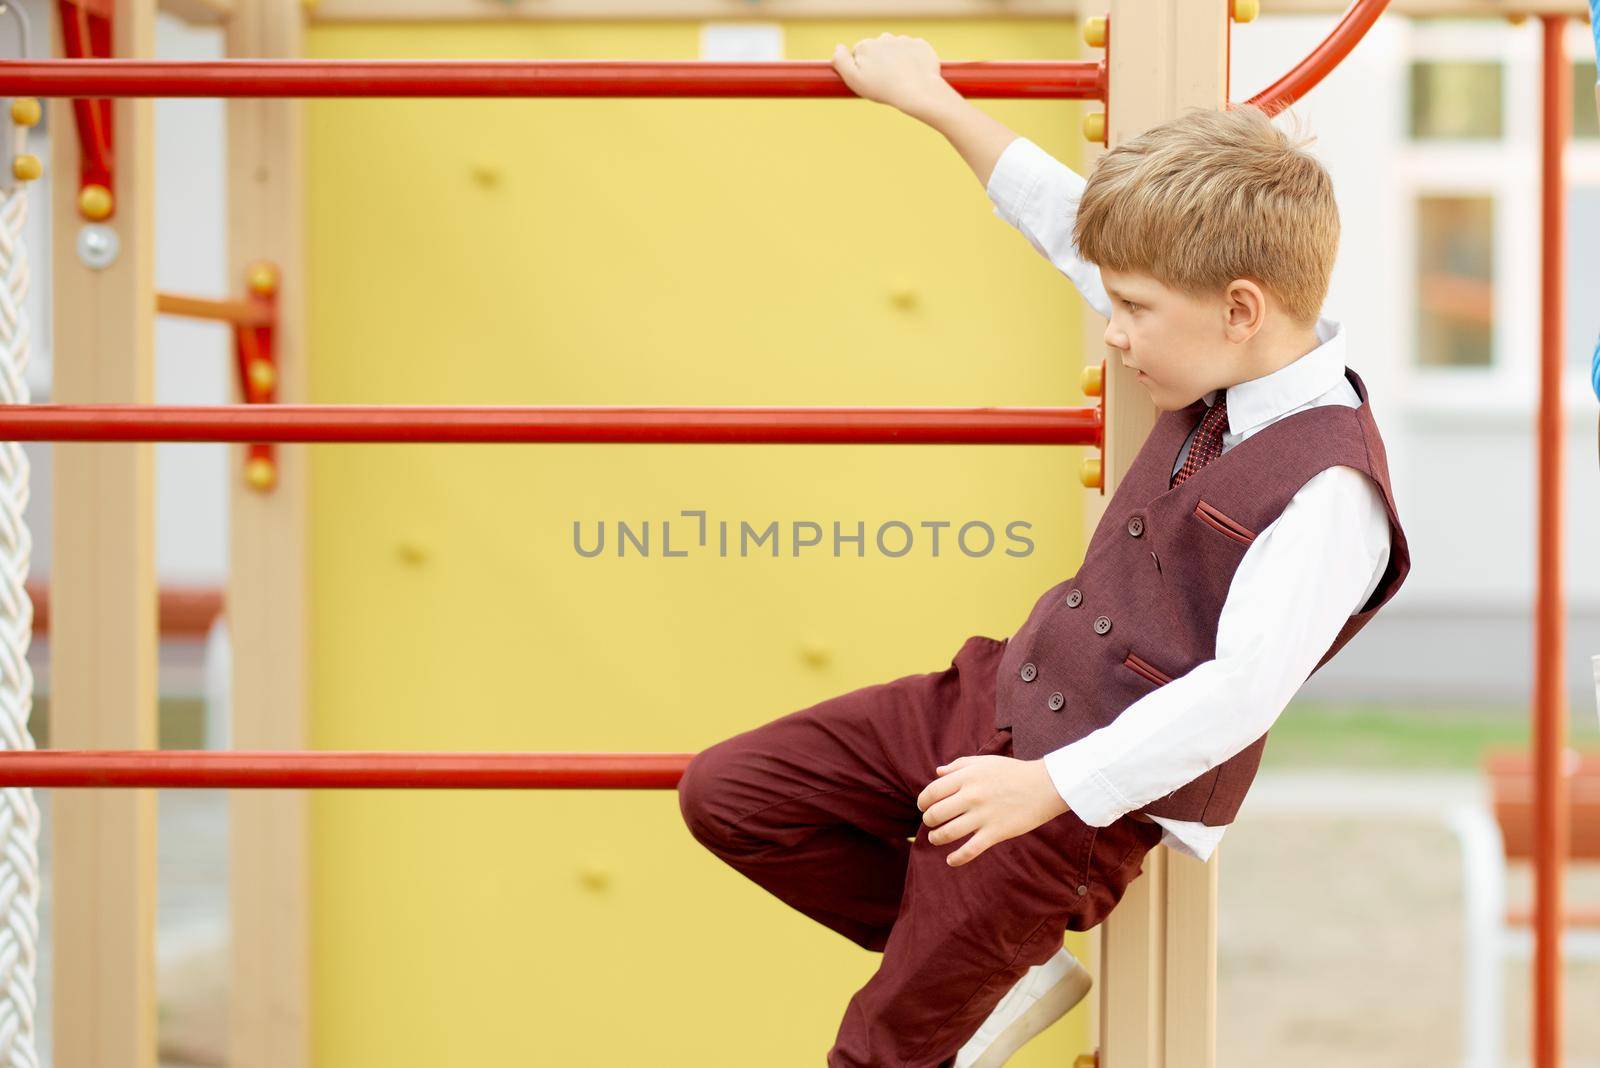 Boy in strict suit plays on the stairs at school on the first day. High quality photo